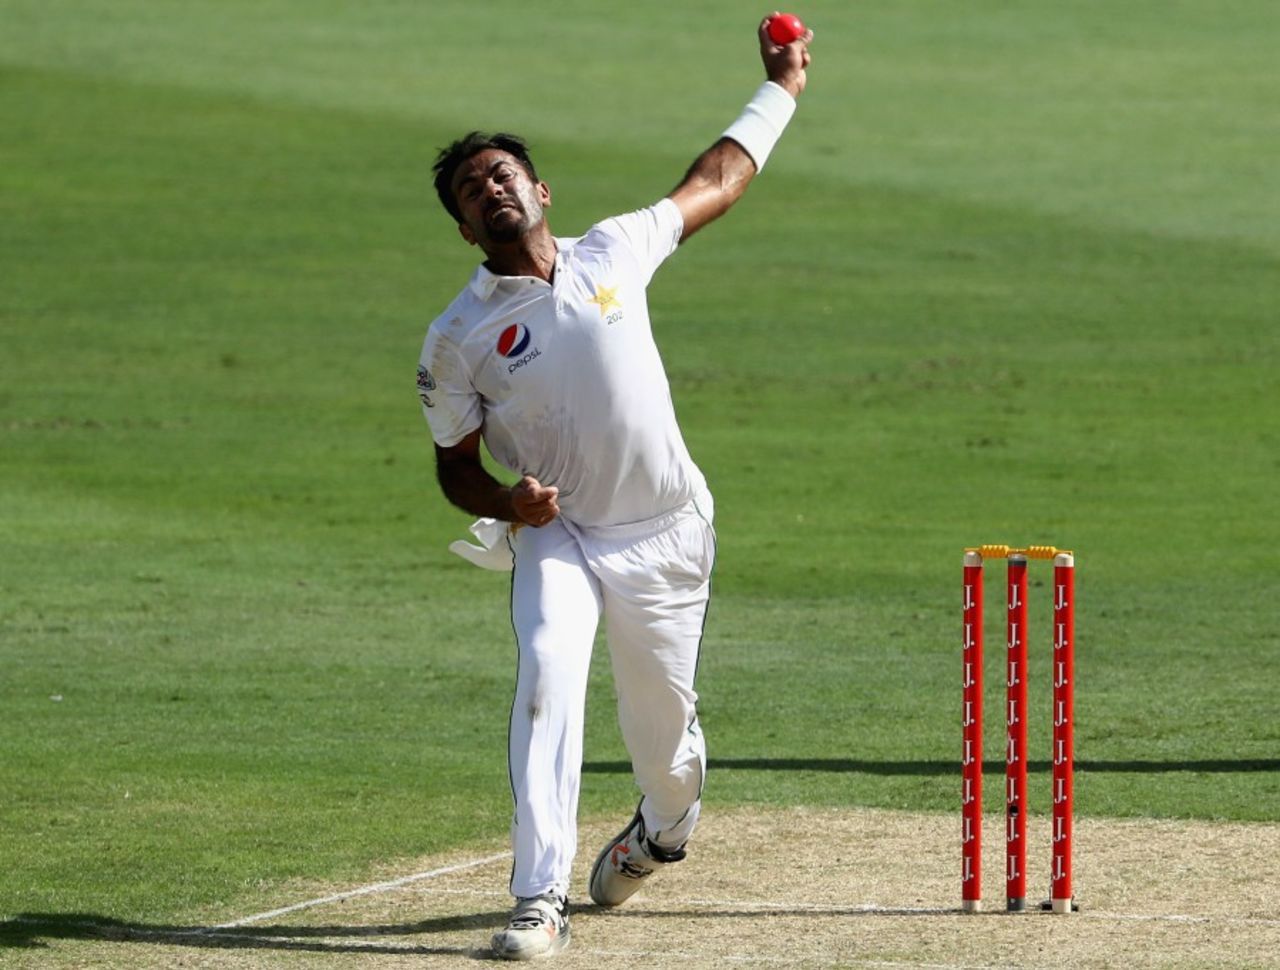 Wahab Riaz in his delivery stride, Pakistan v Sri Lanka, 2nd Test, Dubai, 1st day, October 6, 2017